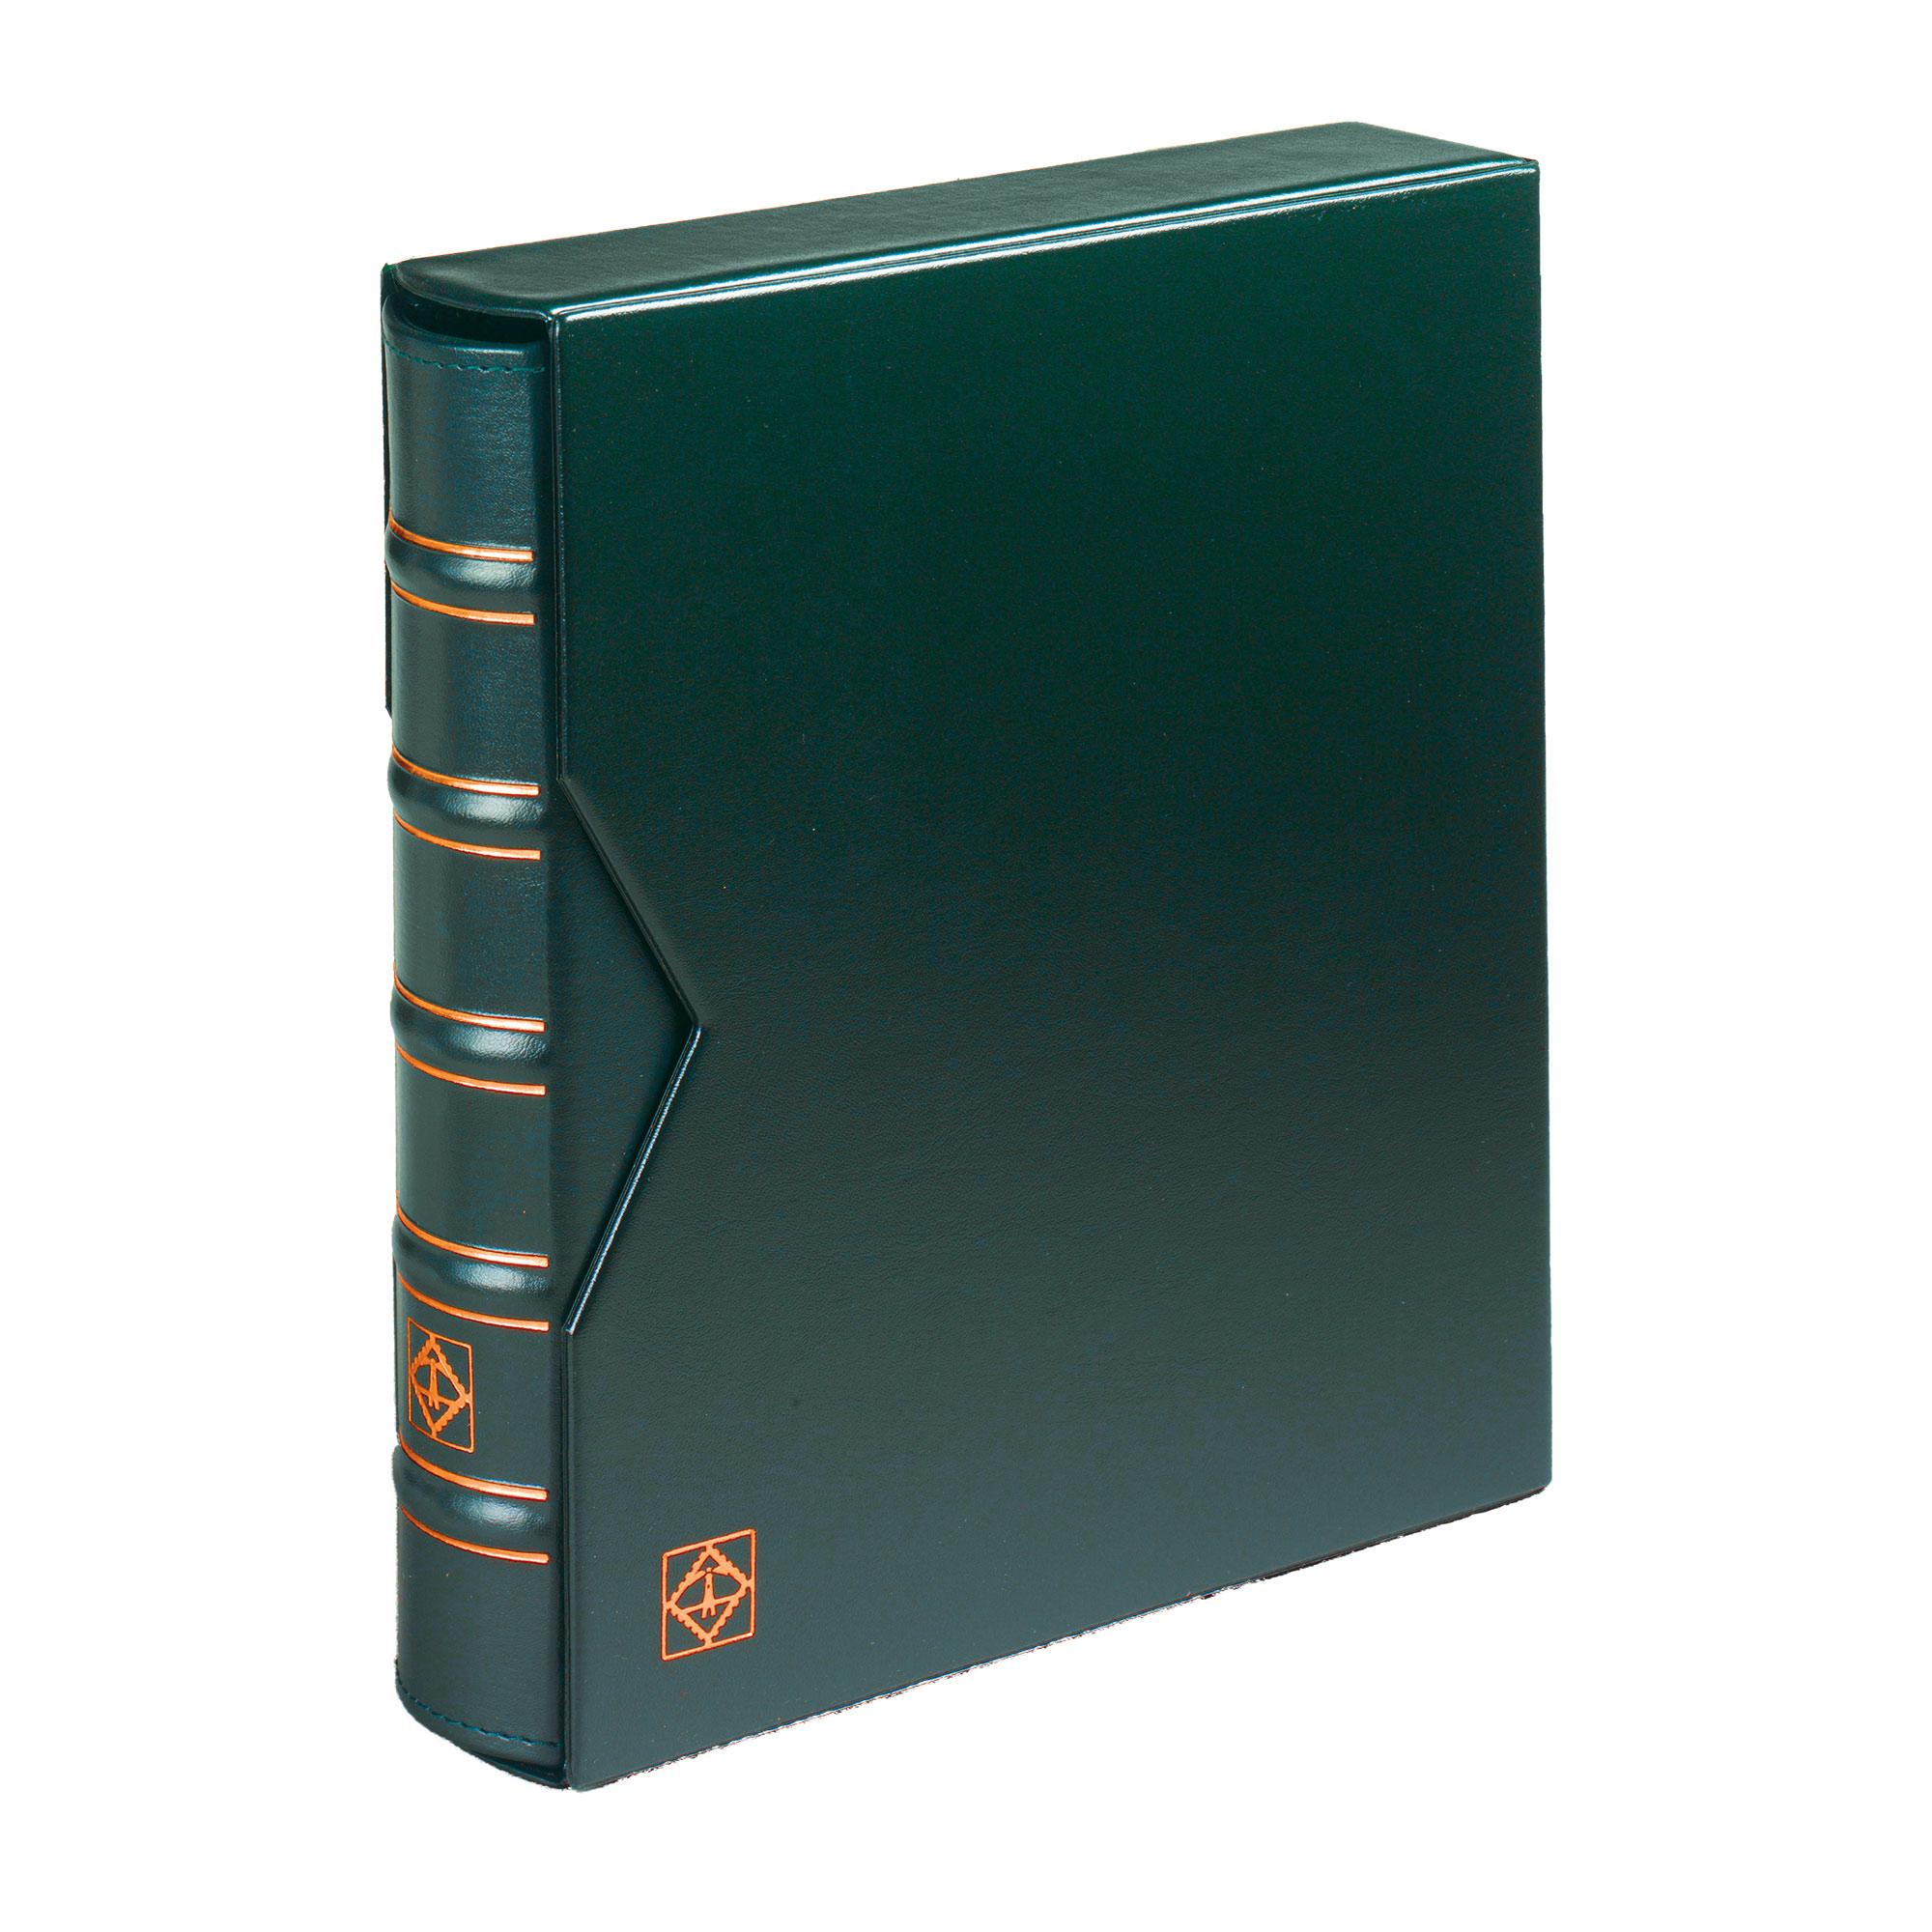 Excellent 13 Ring Classic Binder and Slipcase - Green